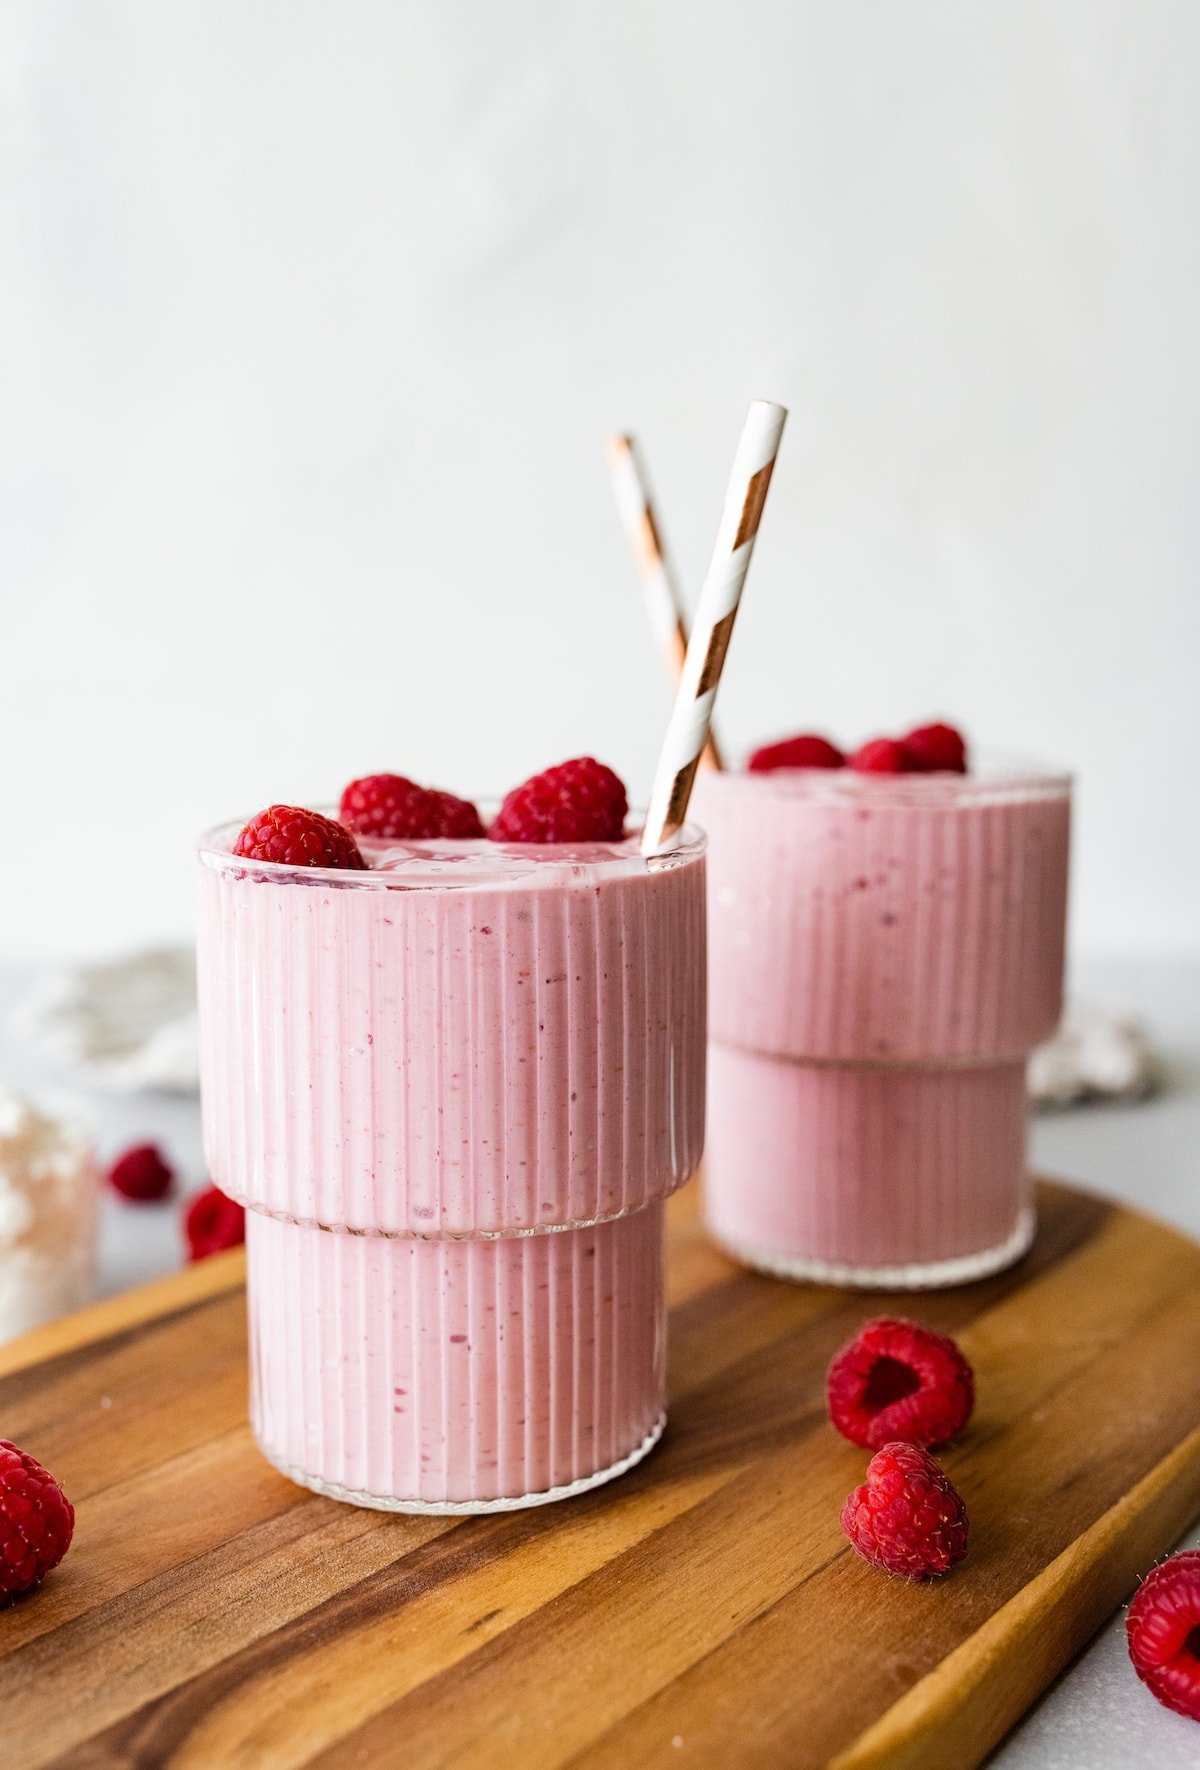 Two cottage cheese smoothies with straws, topped with fresh raspberries.